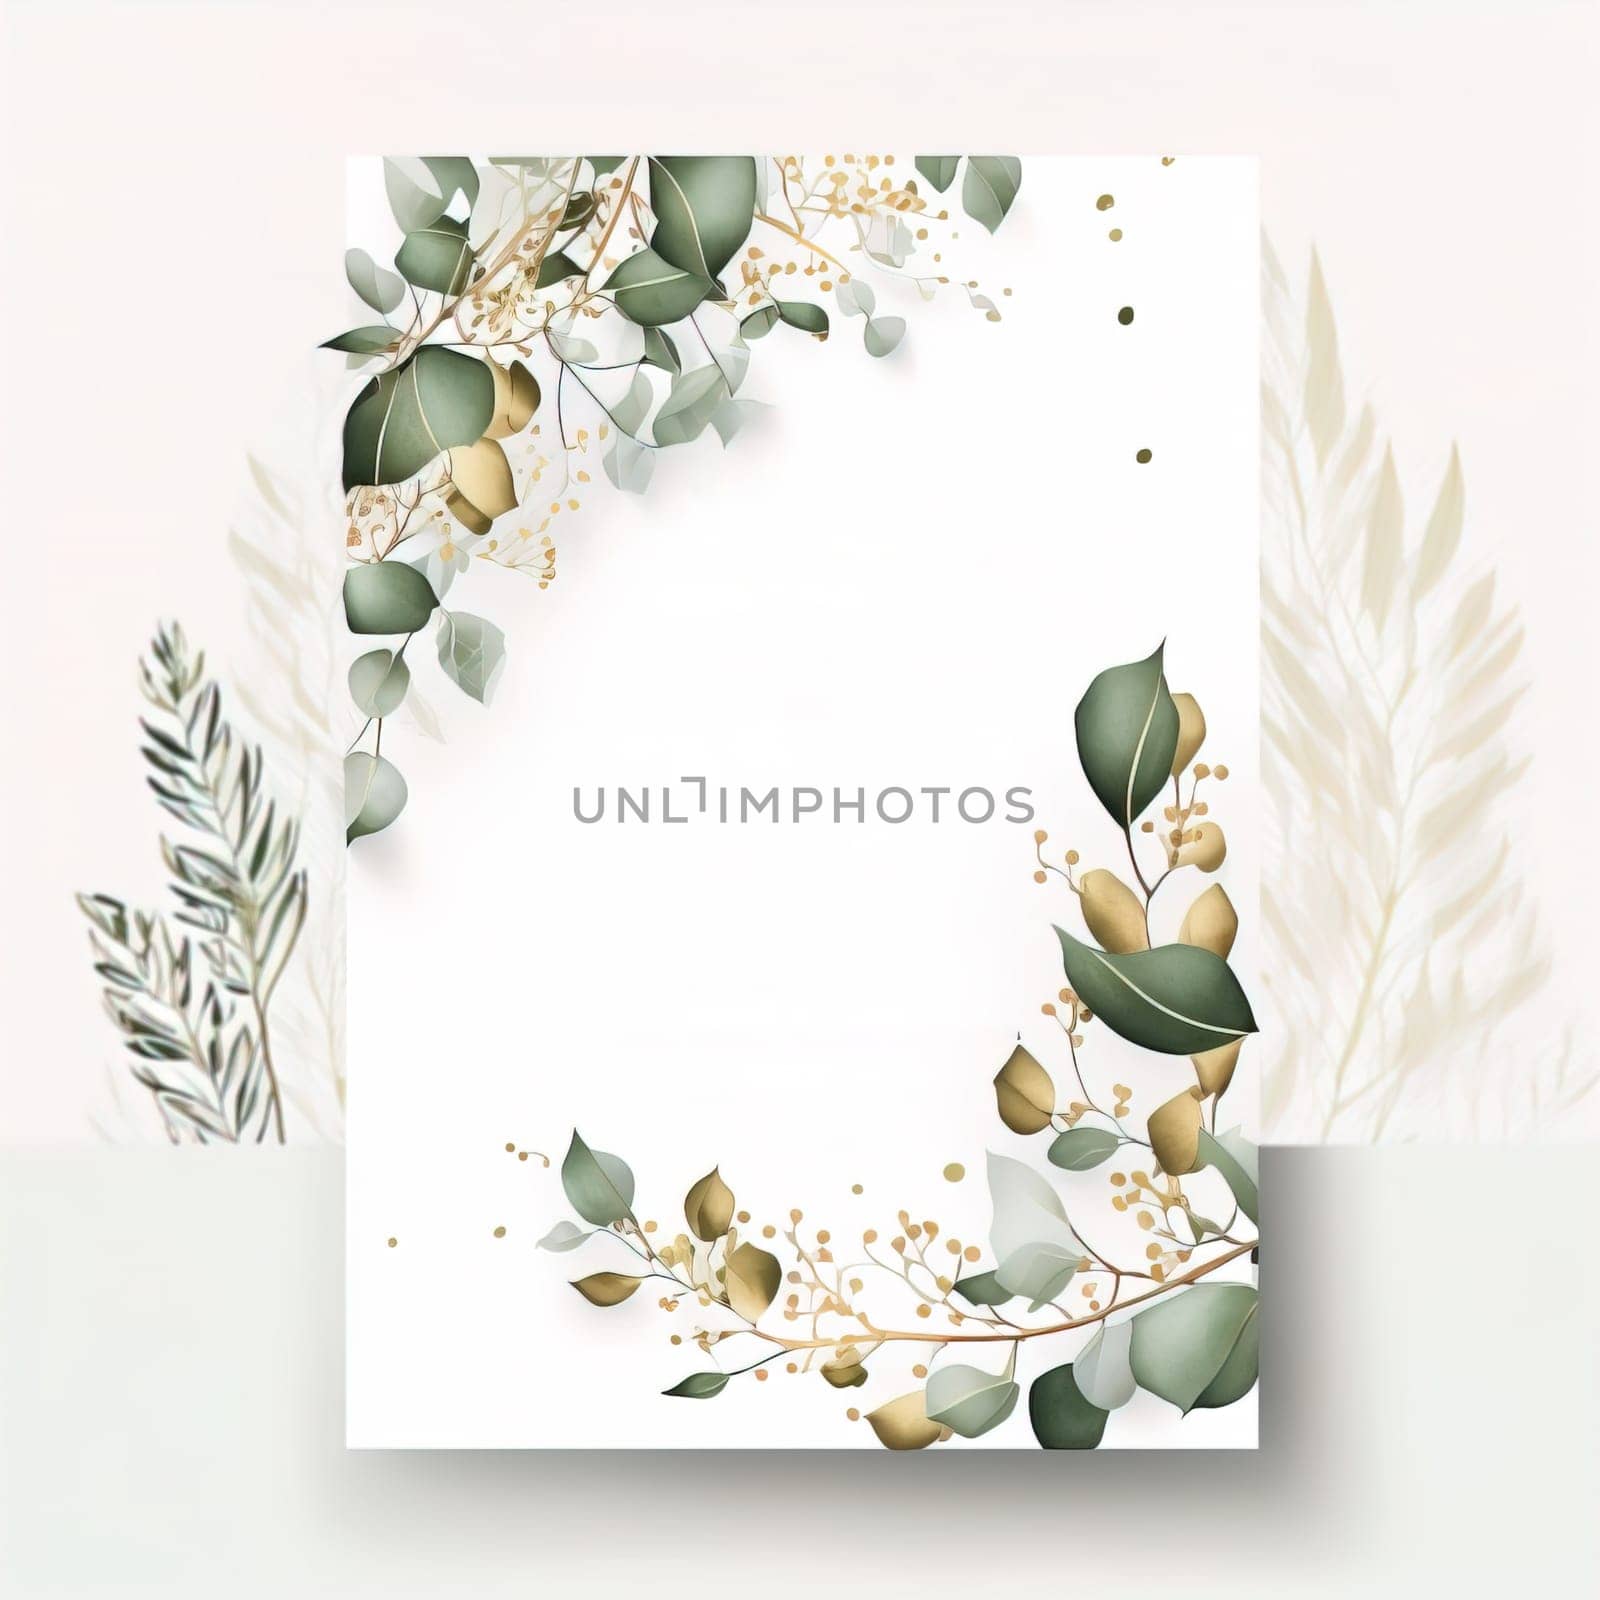 Wedding floral invitation, modern card design. Rosemary, eucalyptus branches on white background with a golden pattern. Elegant rustic template. download image